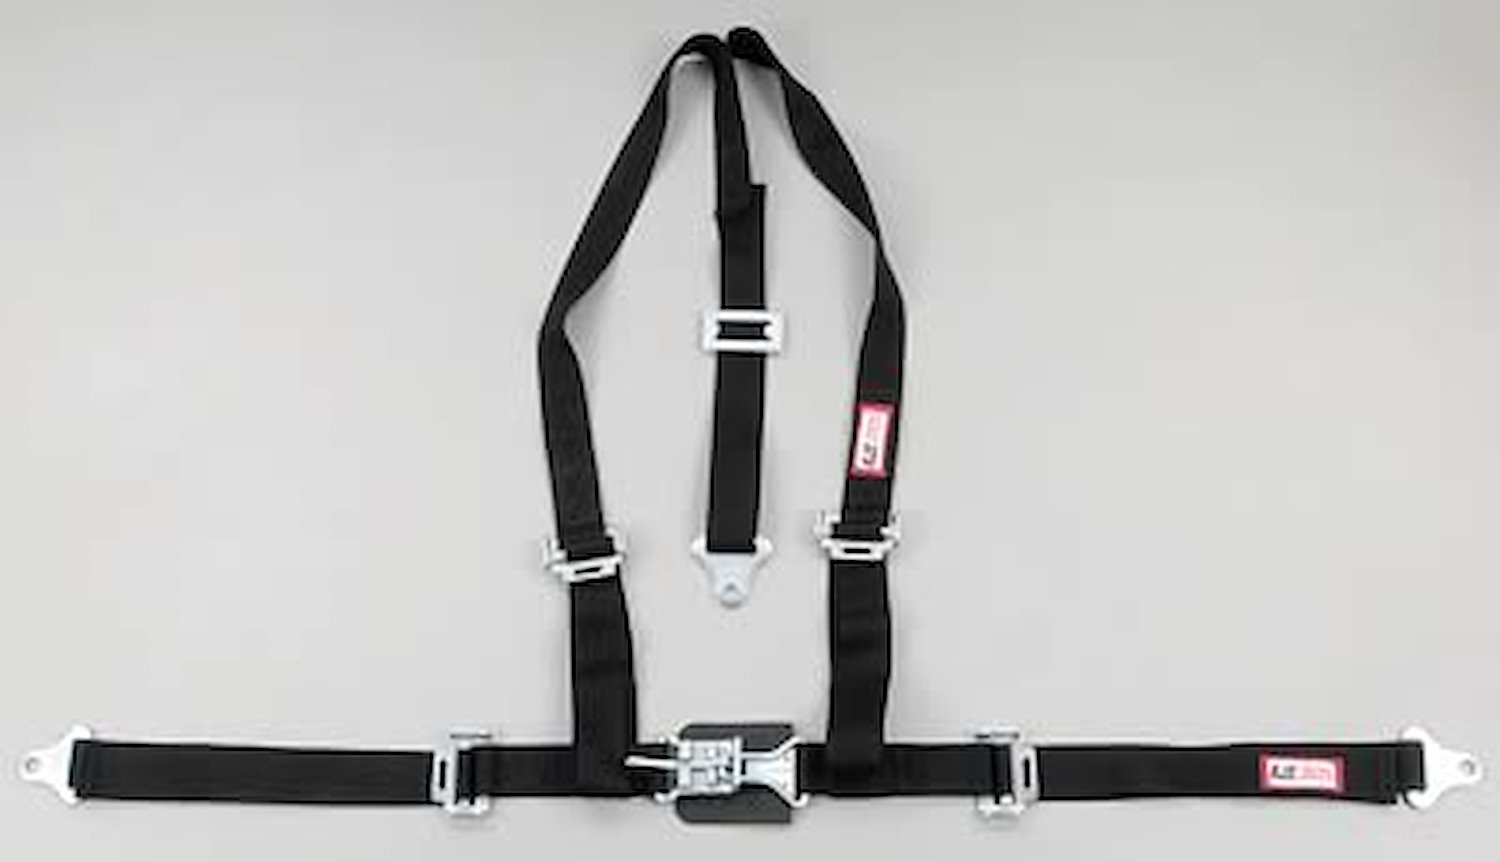 NON-SFI L&L HARNESS 3 PULL DOWN Lap BELT SNAP SEWN IN 2 S.H. Y FLOOR Mount w/STERNUM STRAP WRAP/SNAP GRAY